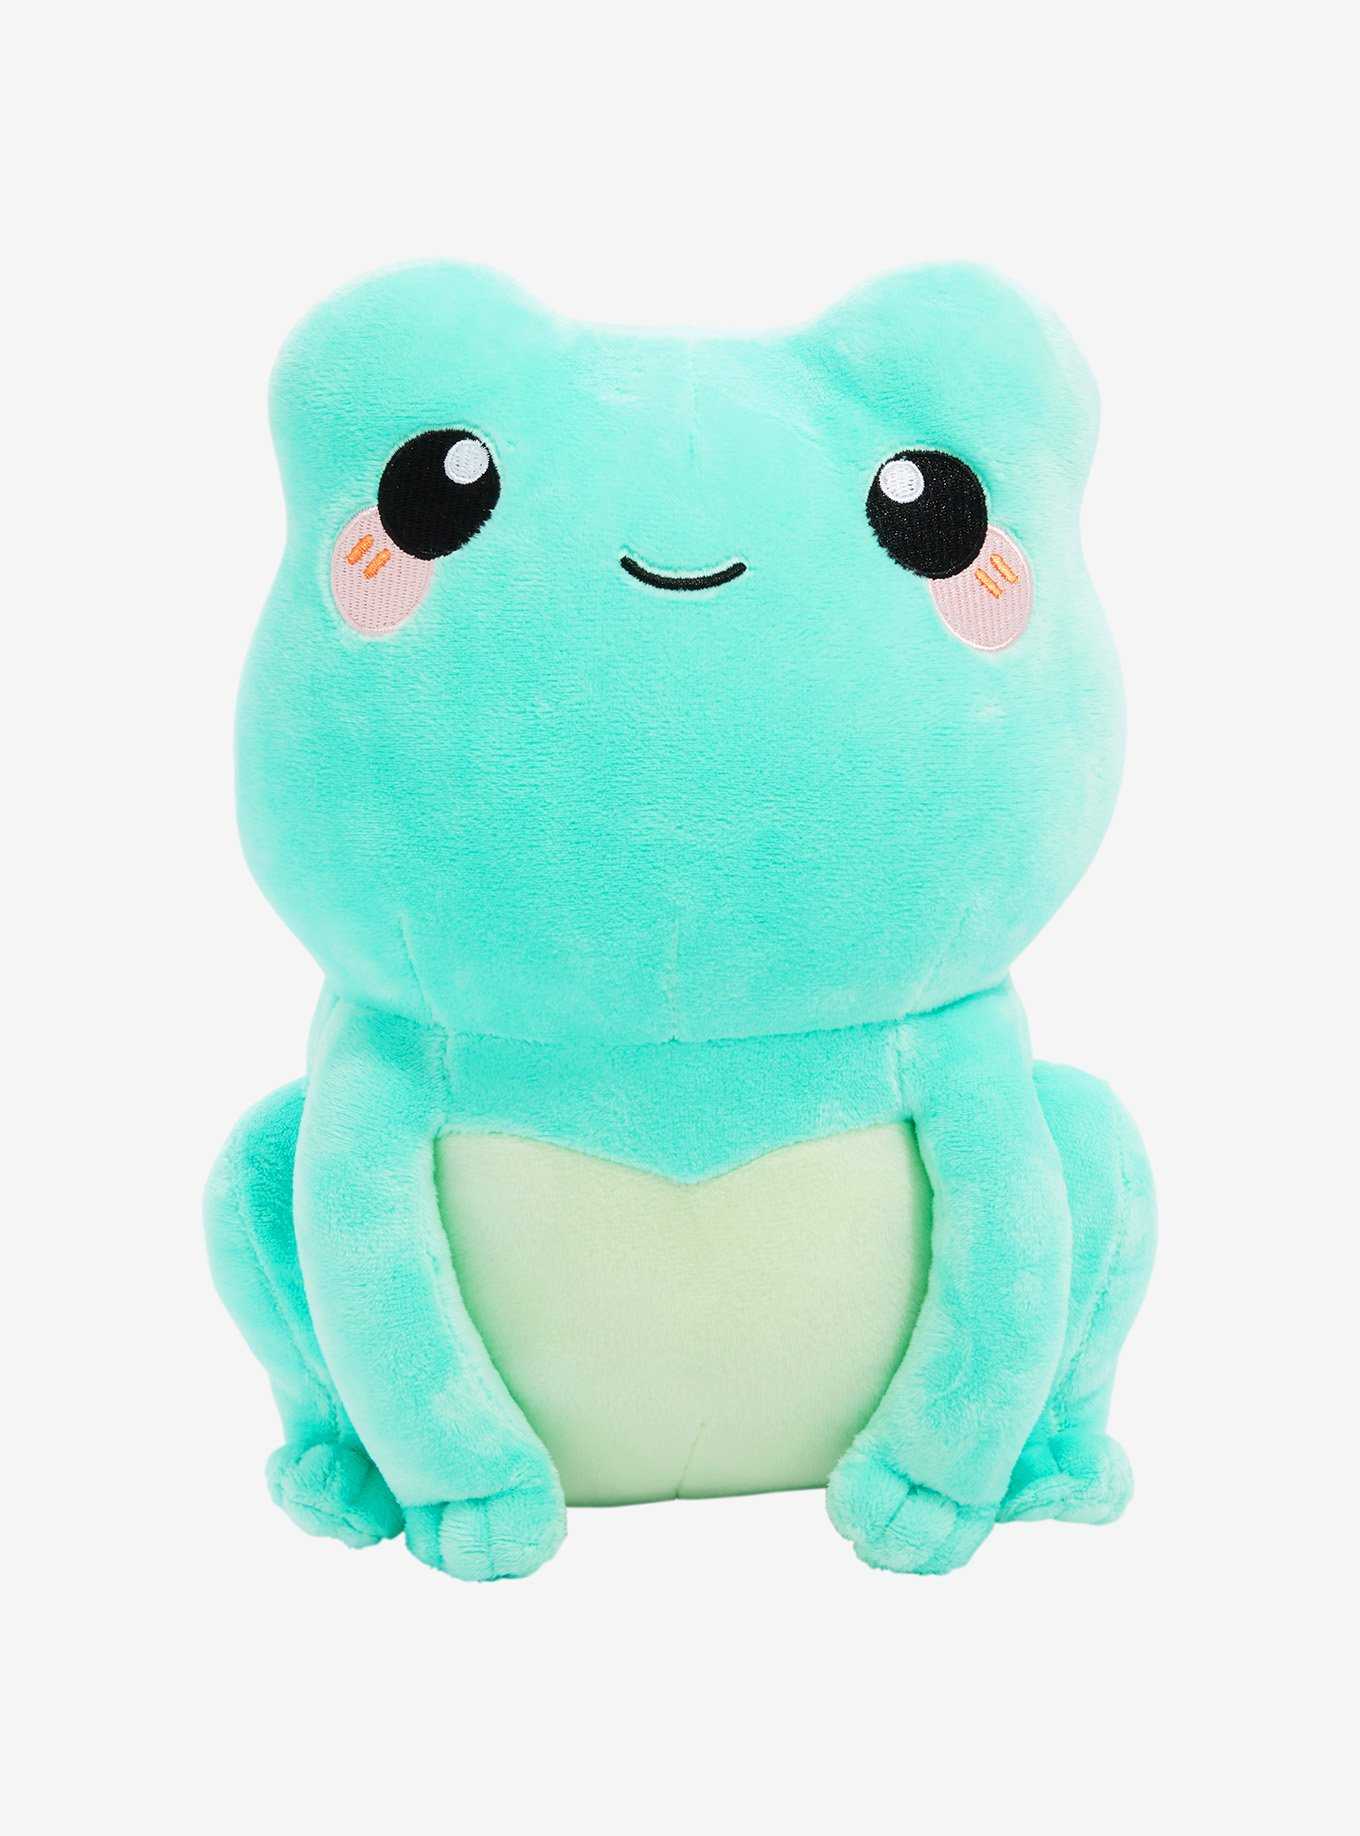 Squishmallows Cherry Blossom Frog Plush Hot Topic Exclusive